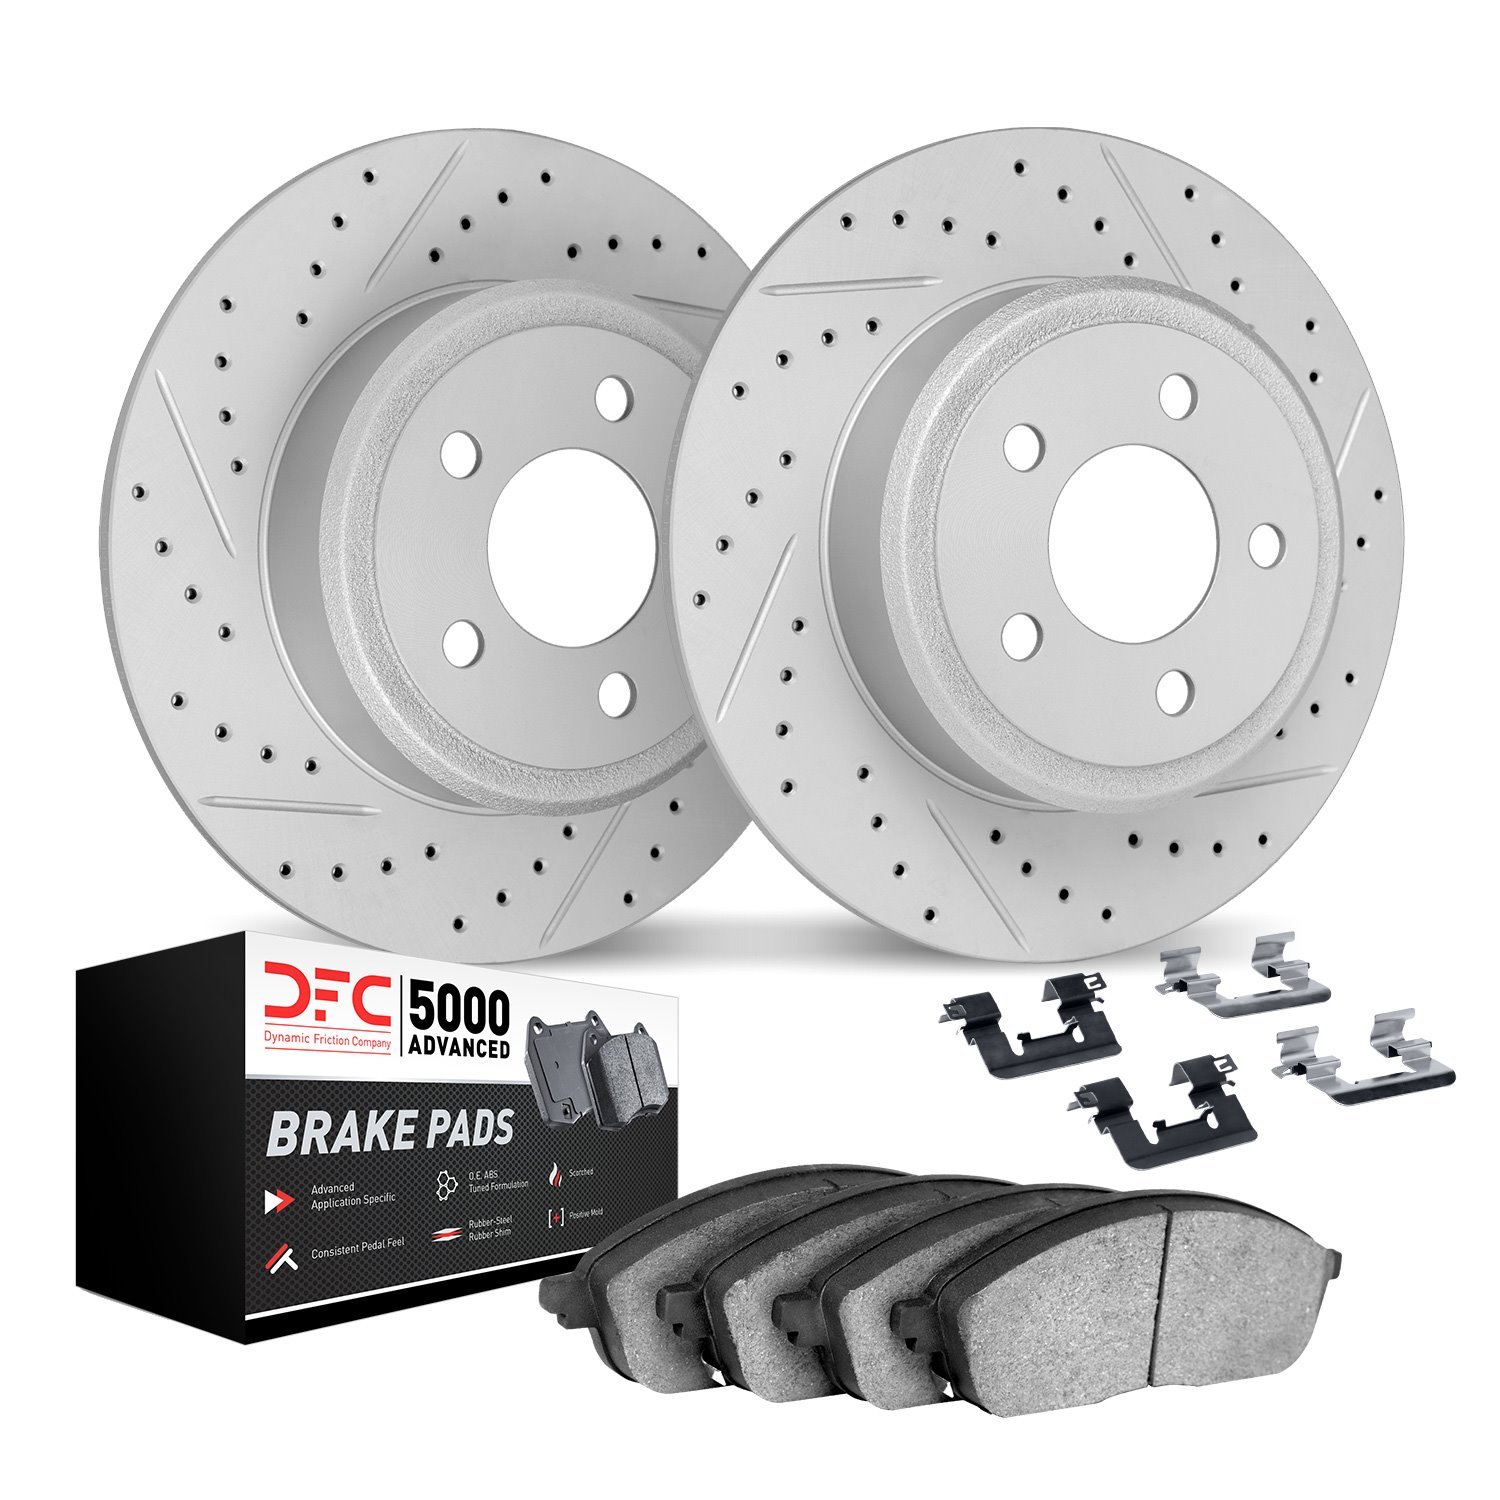 2512-59113 Geoperformance Drilled/Slotted Rotors w/5000 Advanced Brake Pads Kit & Hardware, Fits Select Acura/Honda, Position: R